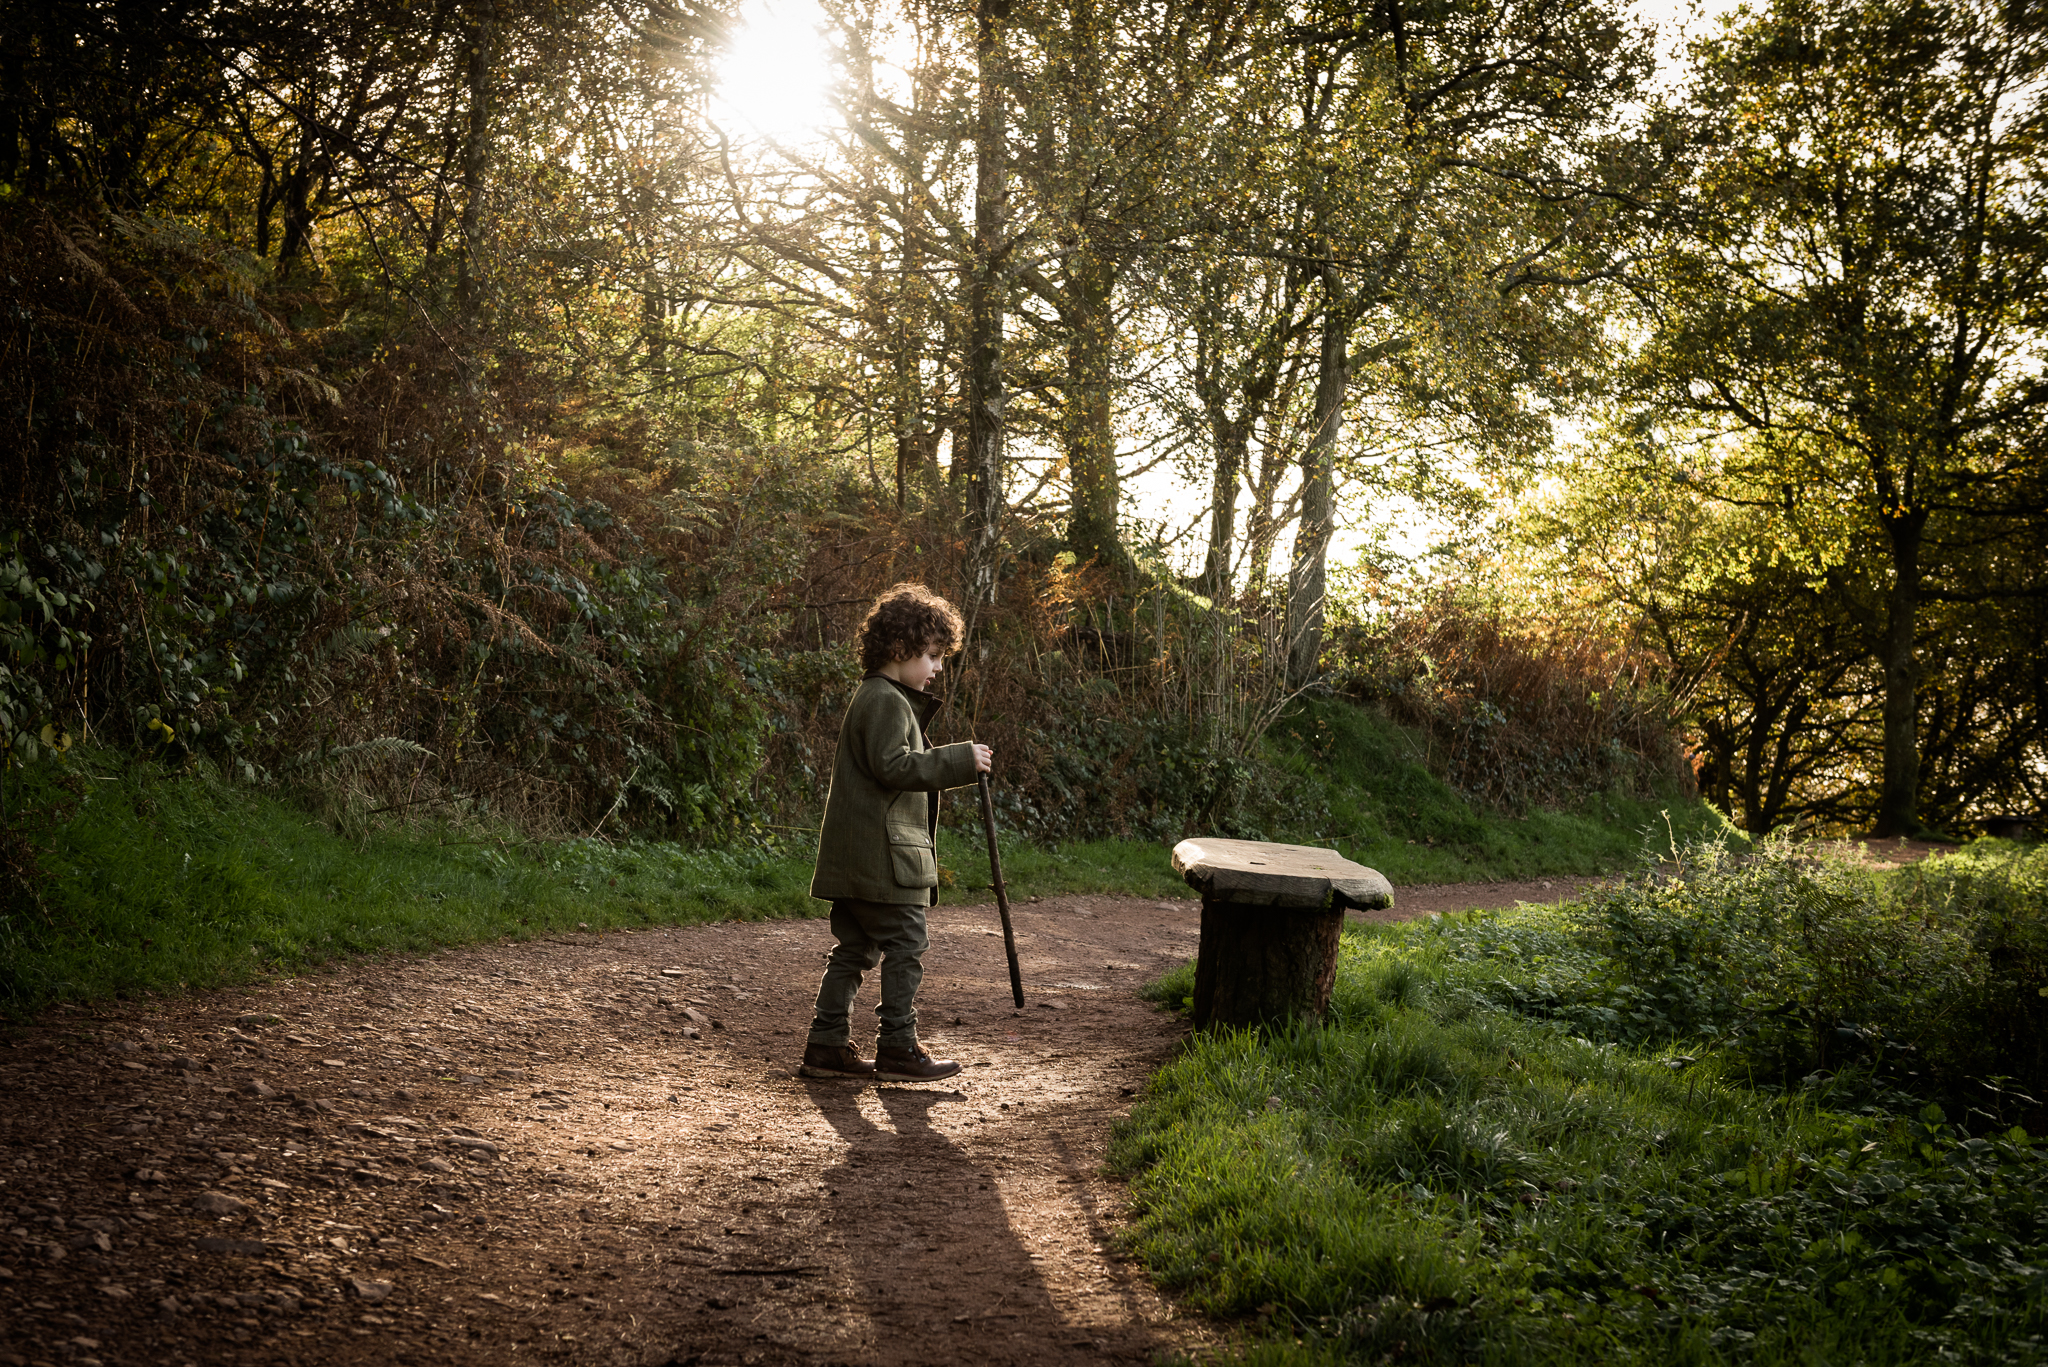 Autumn Documentary Lifestyle Family Photography at Clent Hills, Worcestershire Country Park countryside outdoors nature - Jenny Harper-11.jpg